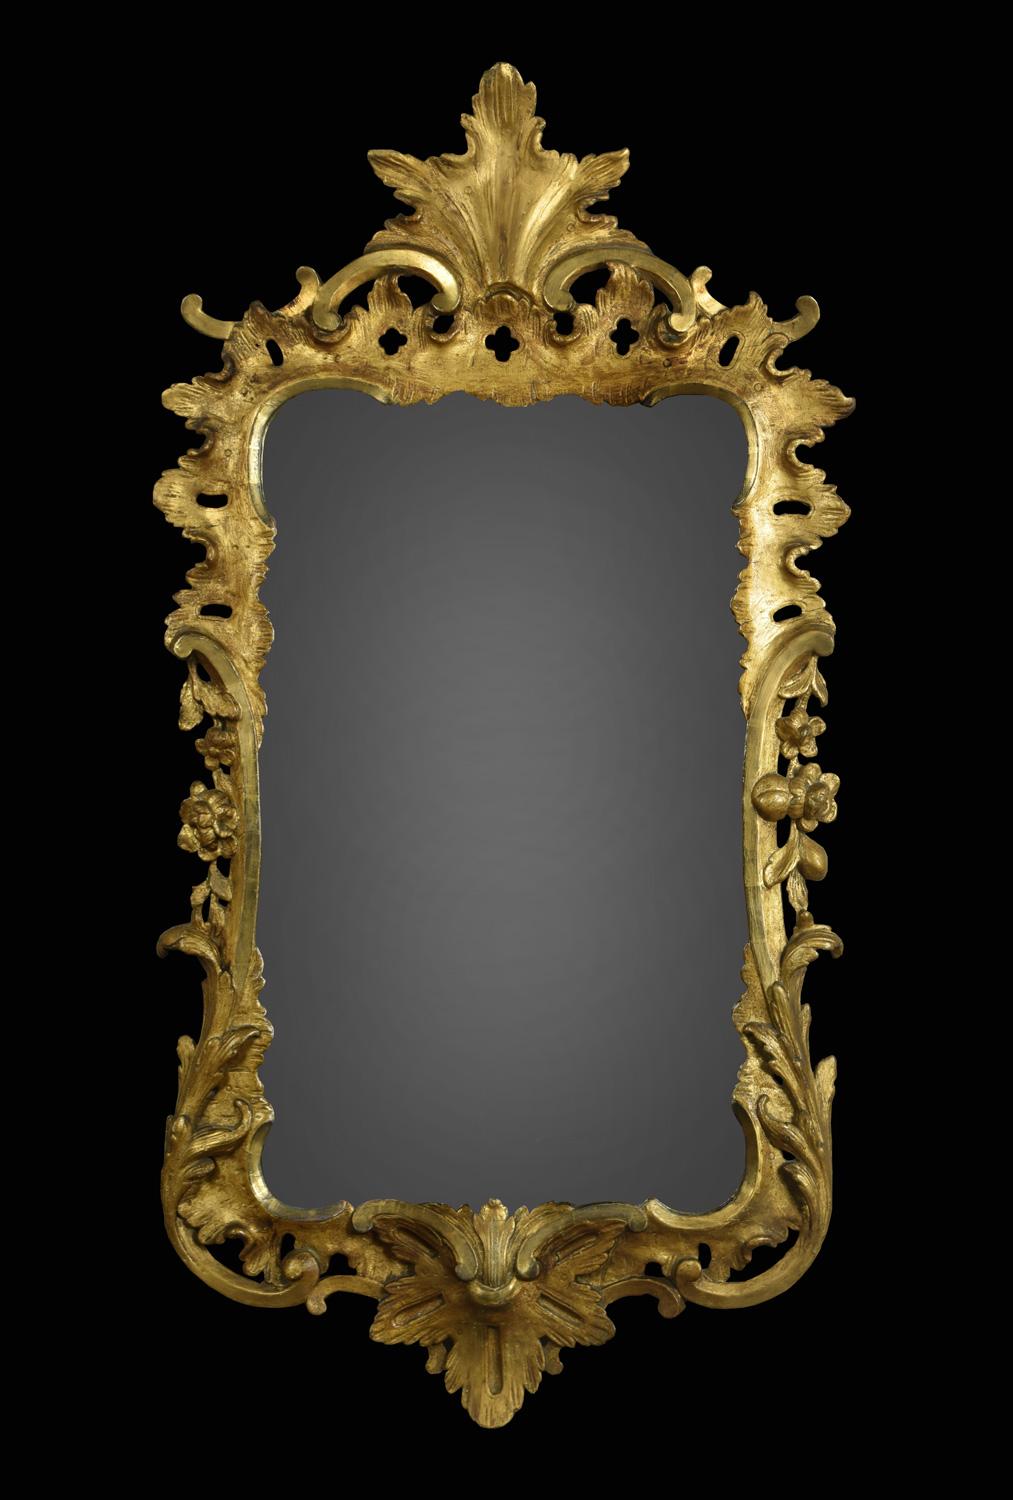 George II style giltwood wall mirror with carved foliated pierced frame surrounding the original mirror plate.

Dimensions:
Height 49 inches,
width 26 inches,
depth 3 inches.